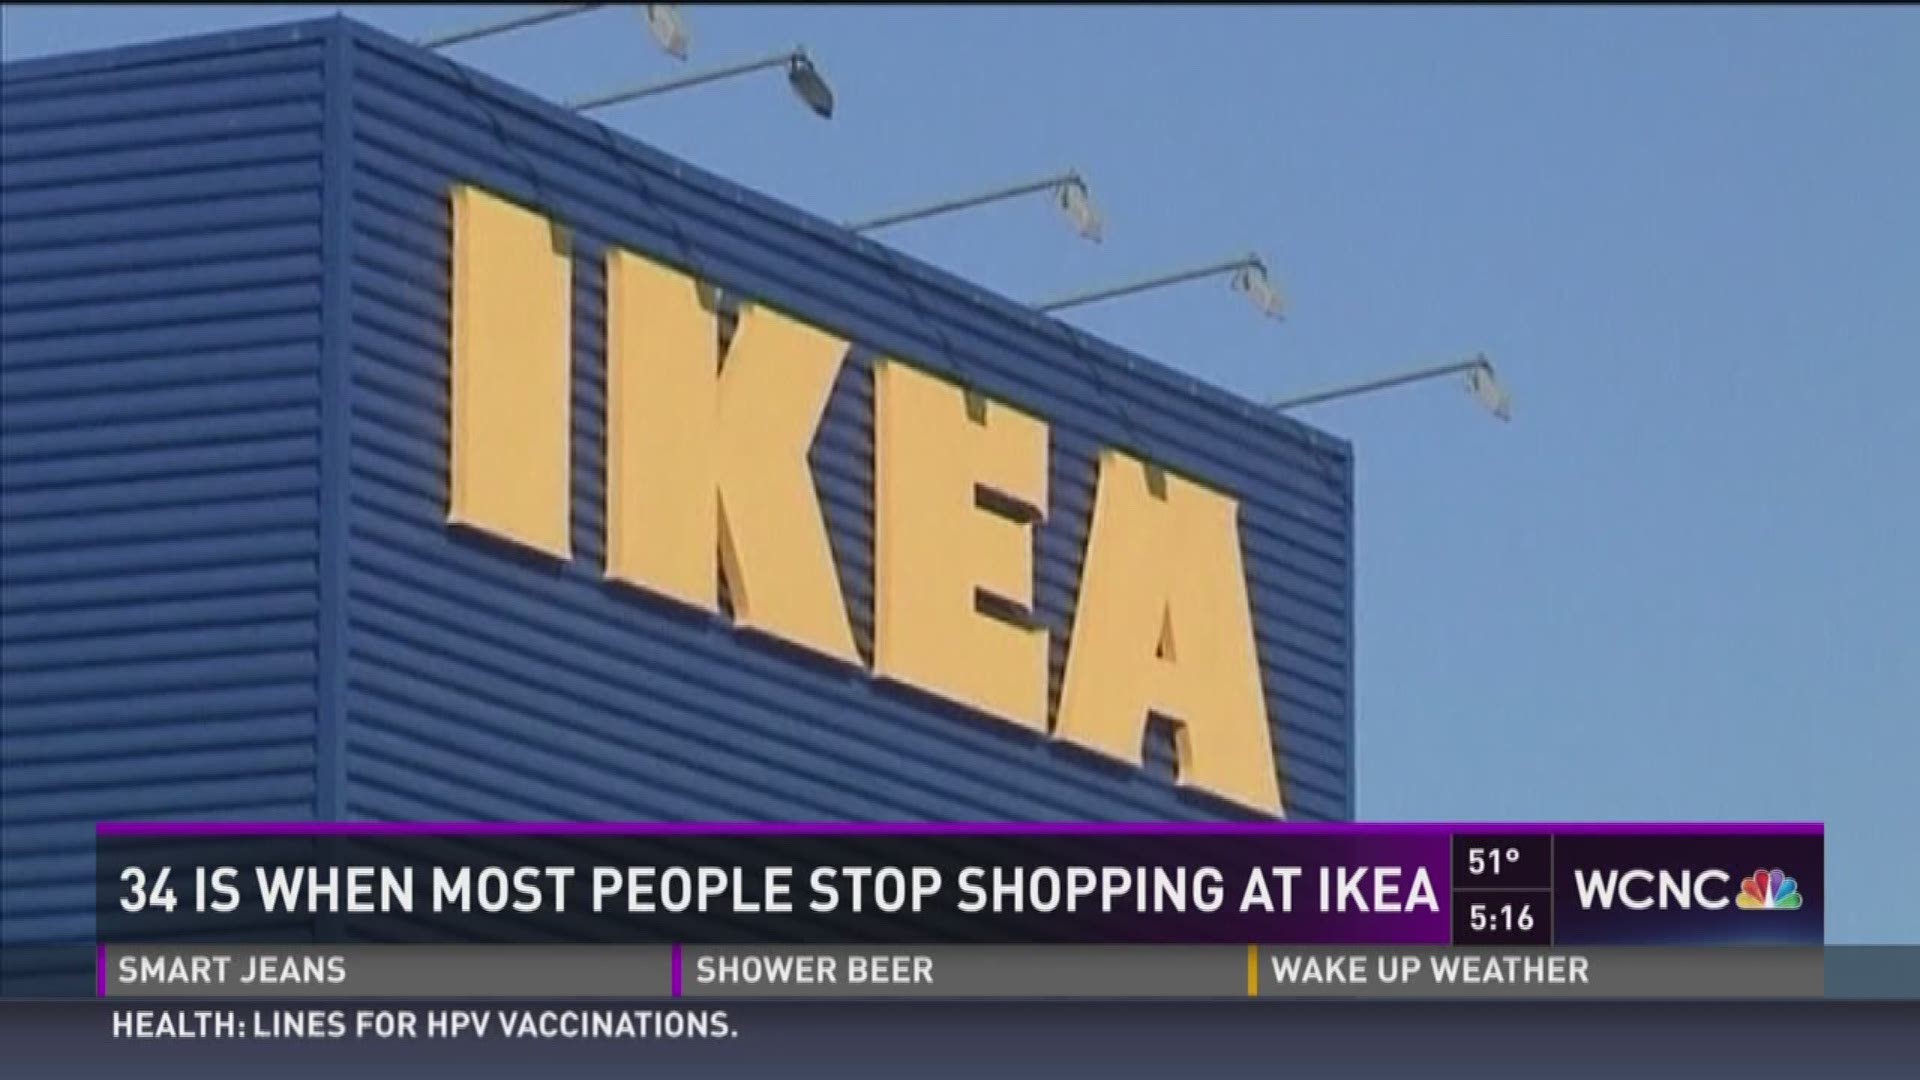 A recent study shows that most Ikea customers stop shopping at Ikea when they reach their mid-30's.